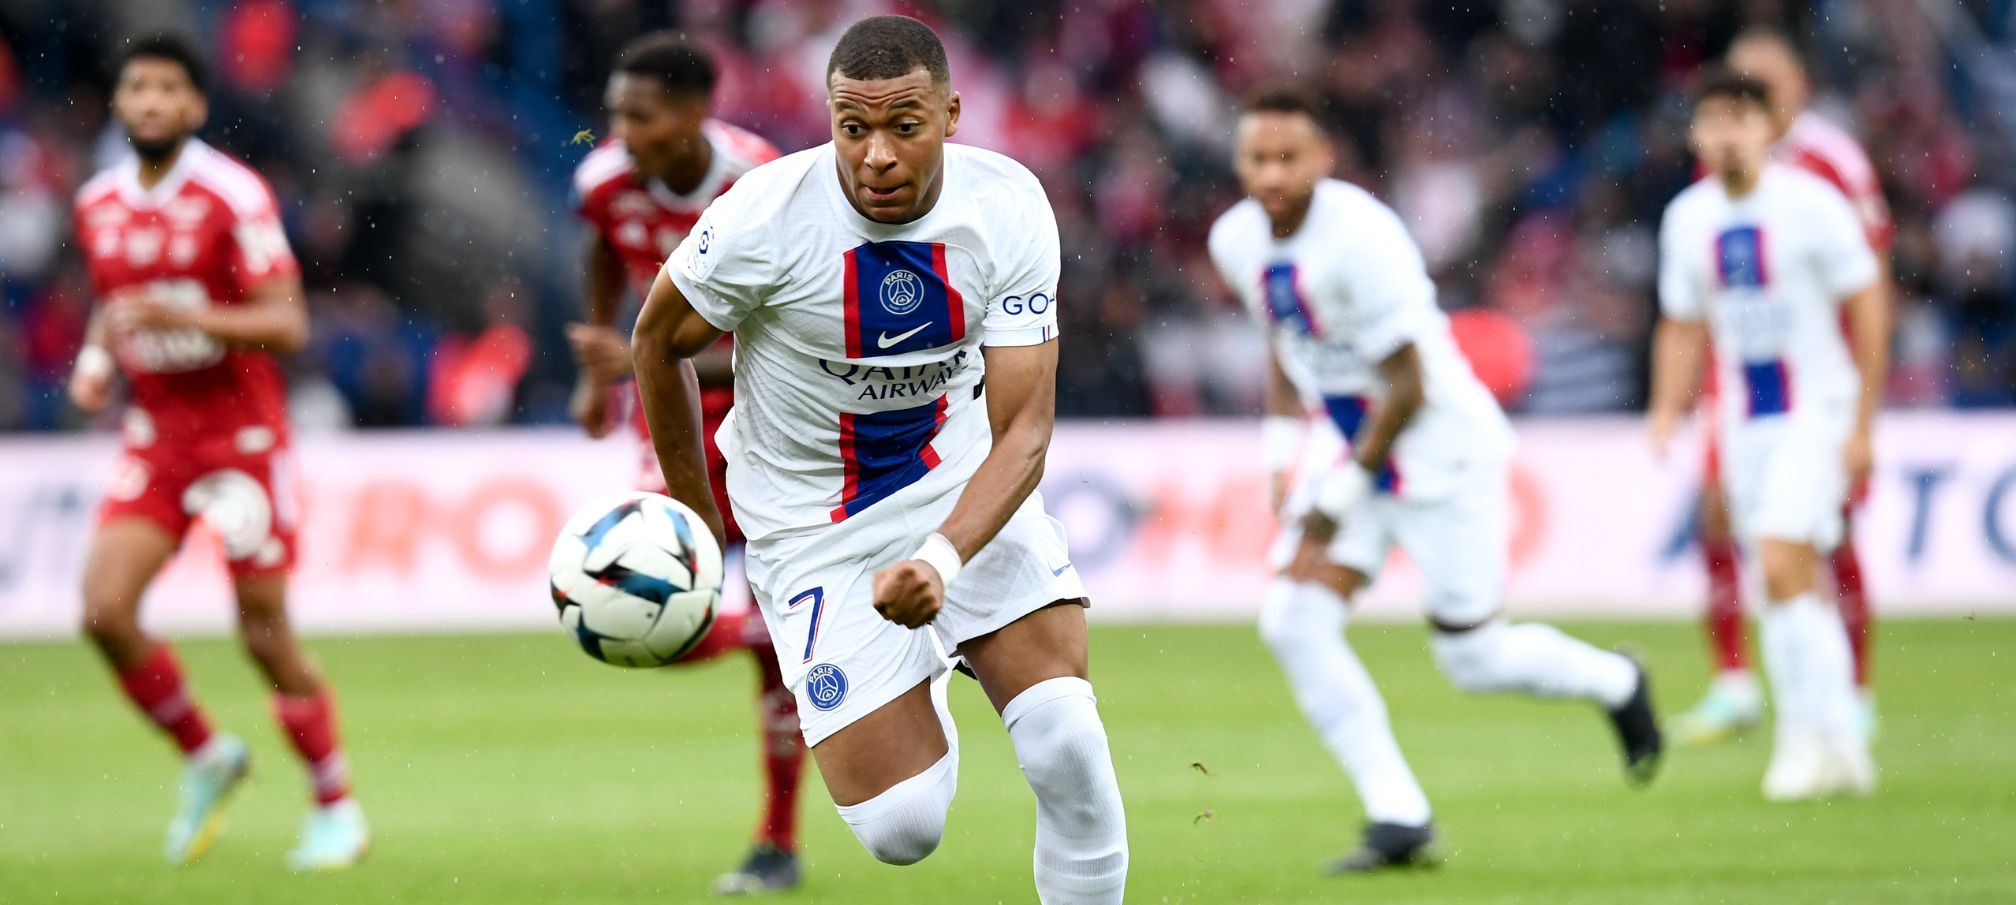 Speed demons: Who can keep up with Kylian Mbappé?